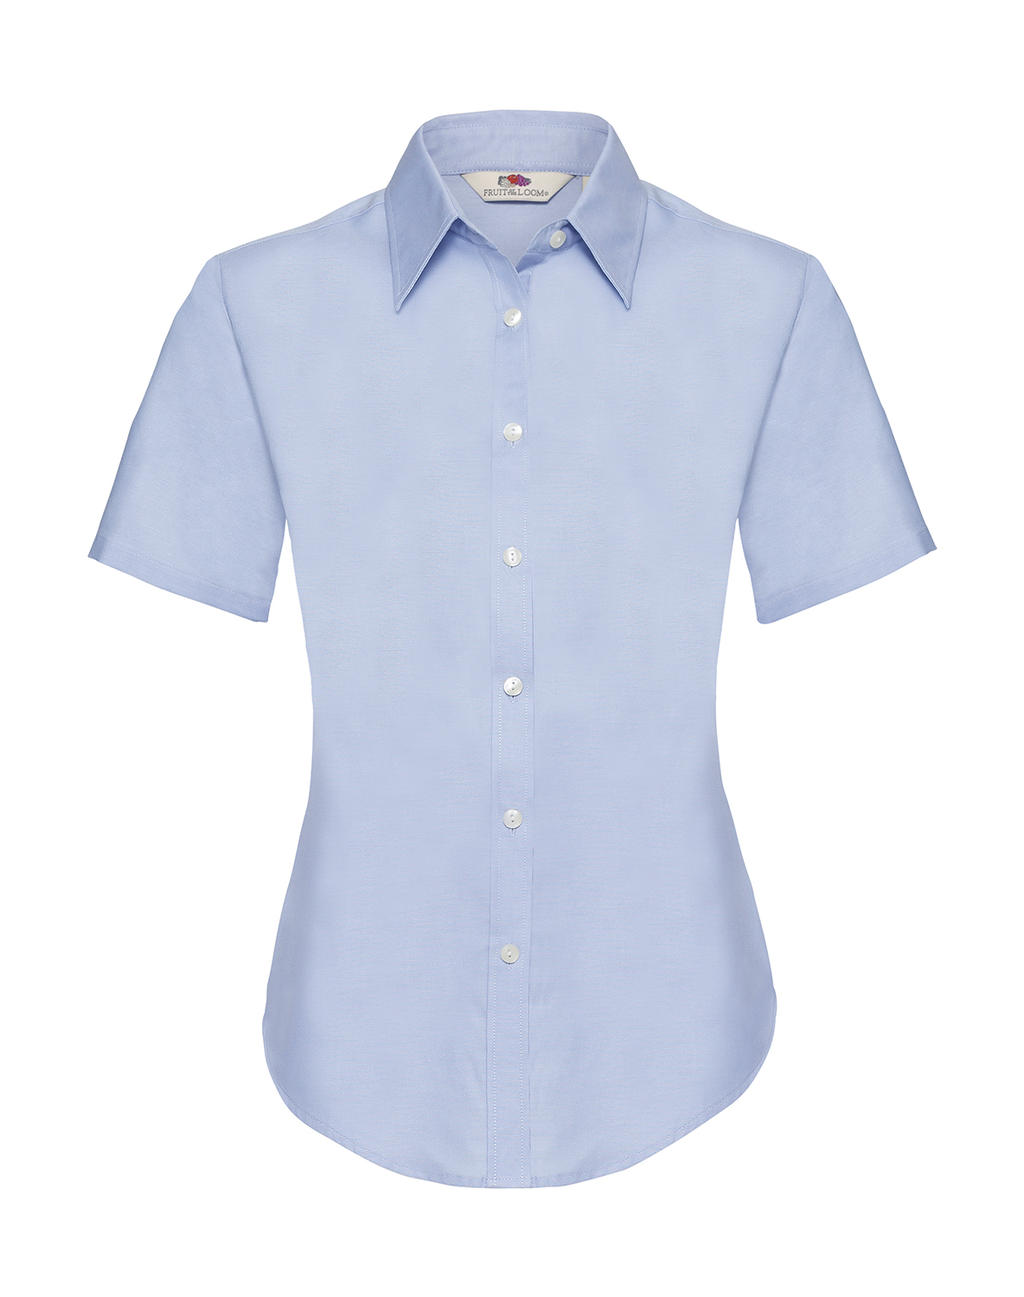  Ladies Oxford Shirt in Farbe Oxford Blue